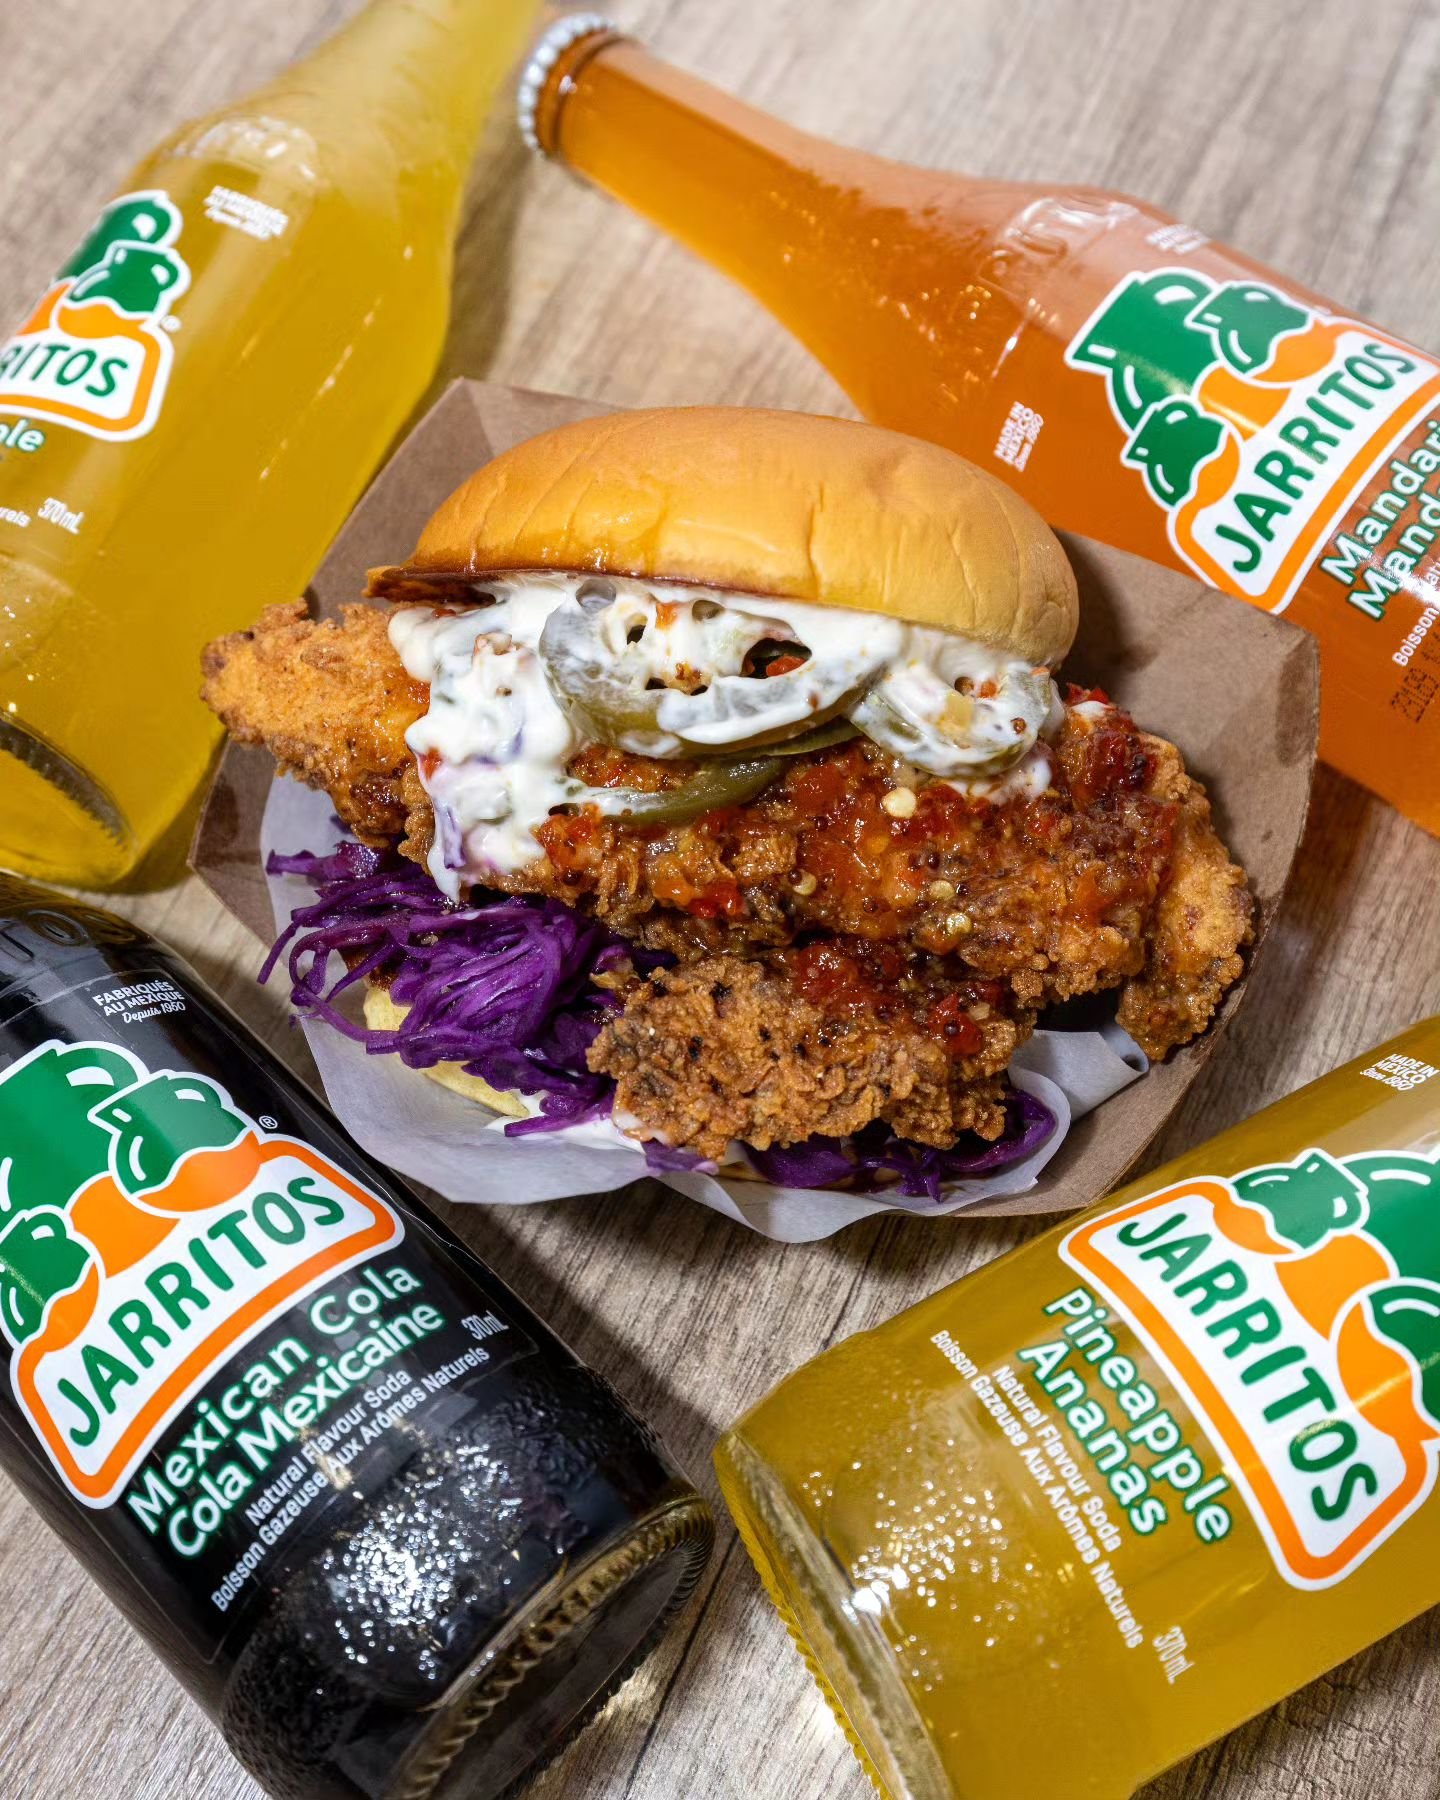 SWEET MUSTARD CHILI CHICKEN 

Buttermilk fried chicken breast, cabbage slaw, pickled jalape&ntilde;os, garlic aioli, sweet mustard chili sauce, toasted potato bun 

JABS is here to announce that we will be taking part in &ldquo;Off-Menu Food Crawl&rd